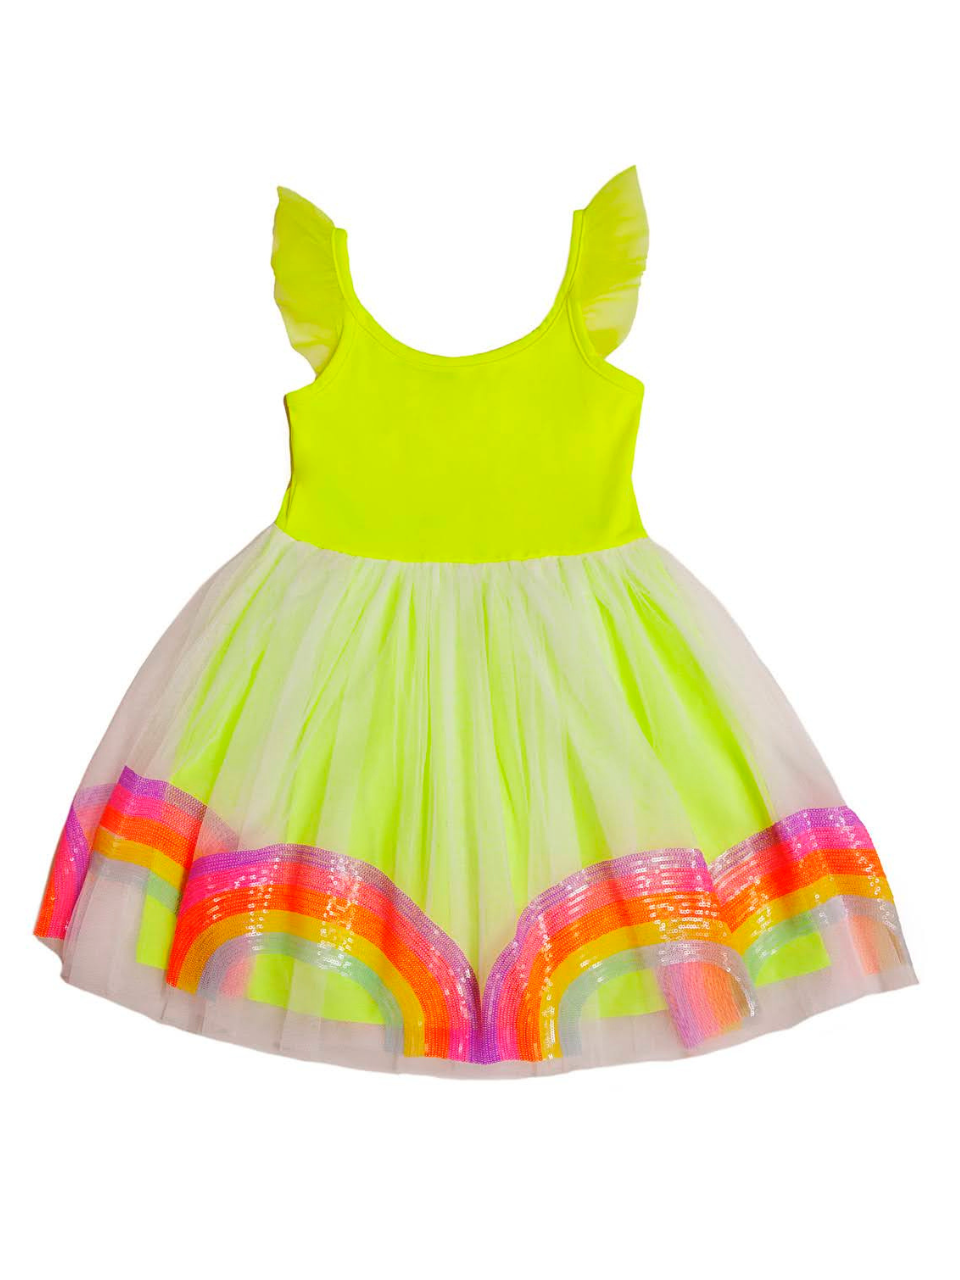 A neon yellow dress with a full skirt and rainbow sequin trim.